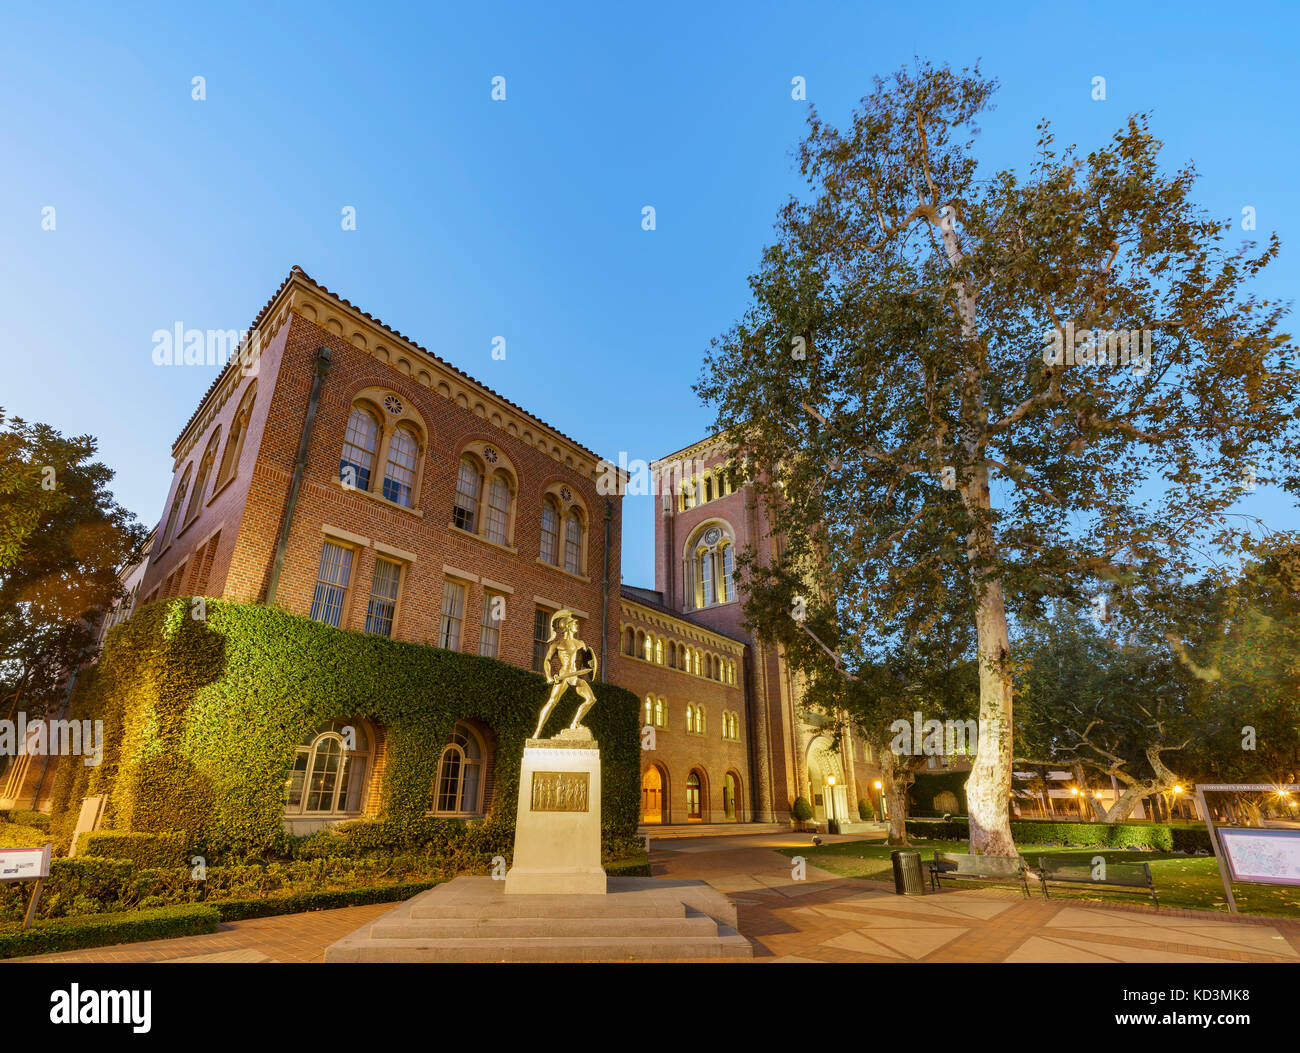 Los Angeles, OCT 8: Night view of the beautiful Tommy Trojan and Bovard Auditorium on OCT 8, 2017 at University of Southern California, Los Angeles, C Stock Photo